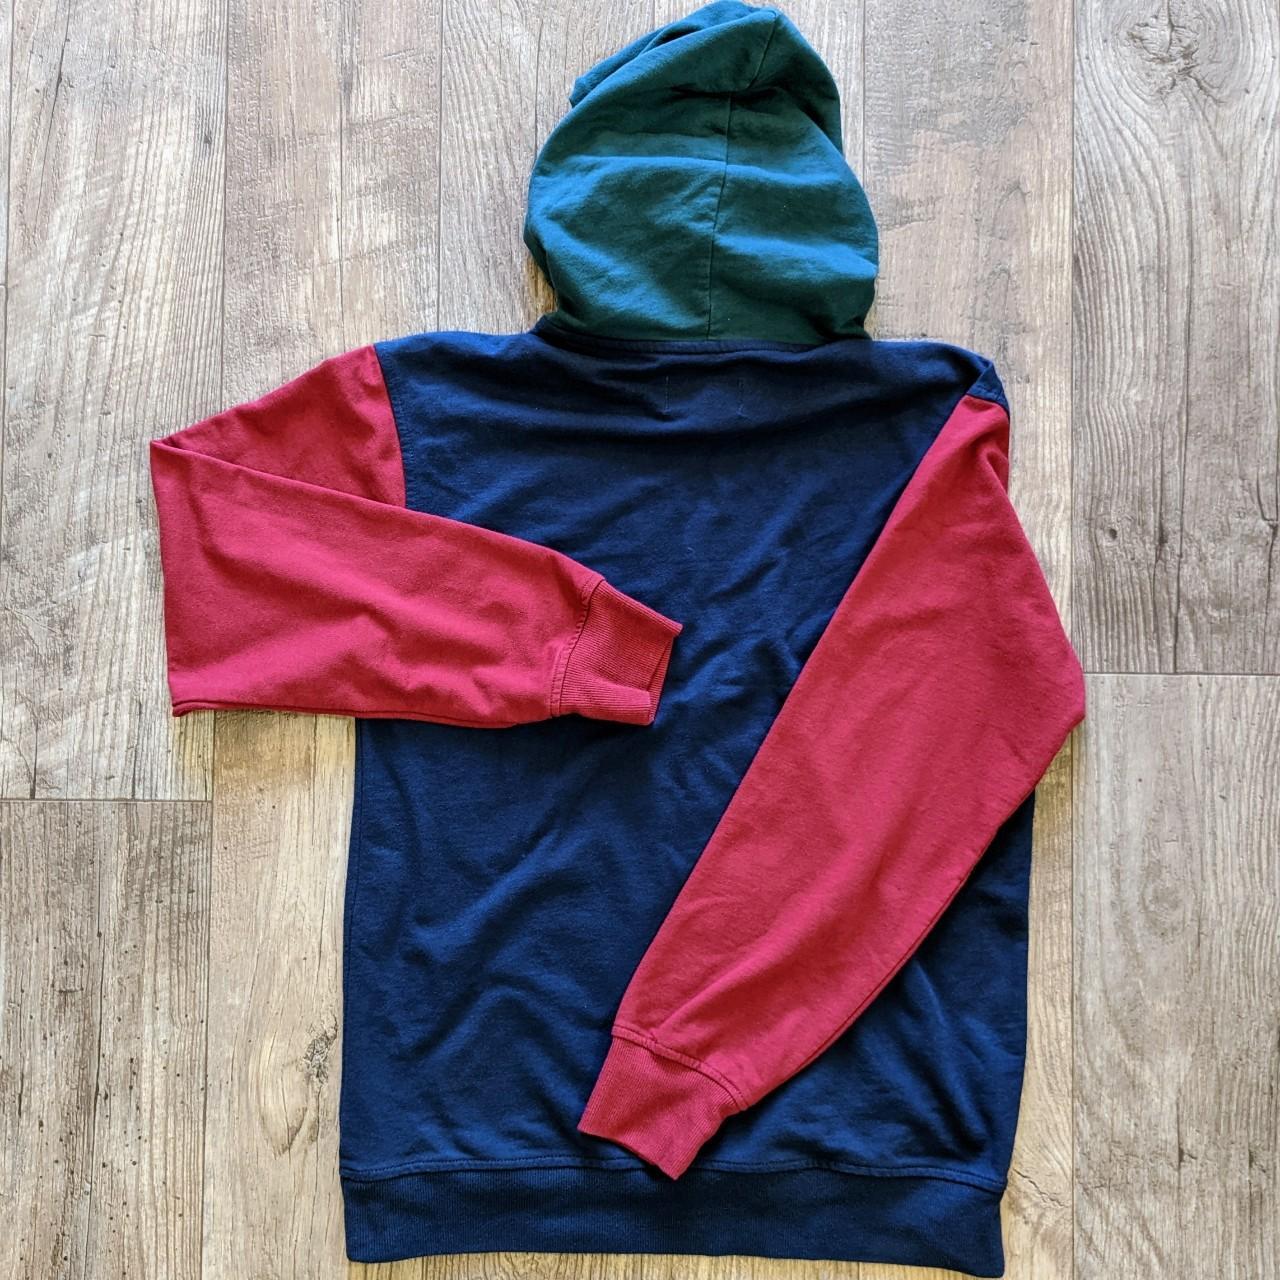 Product Image 3 - Fake Polo hood

Ain't much to